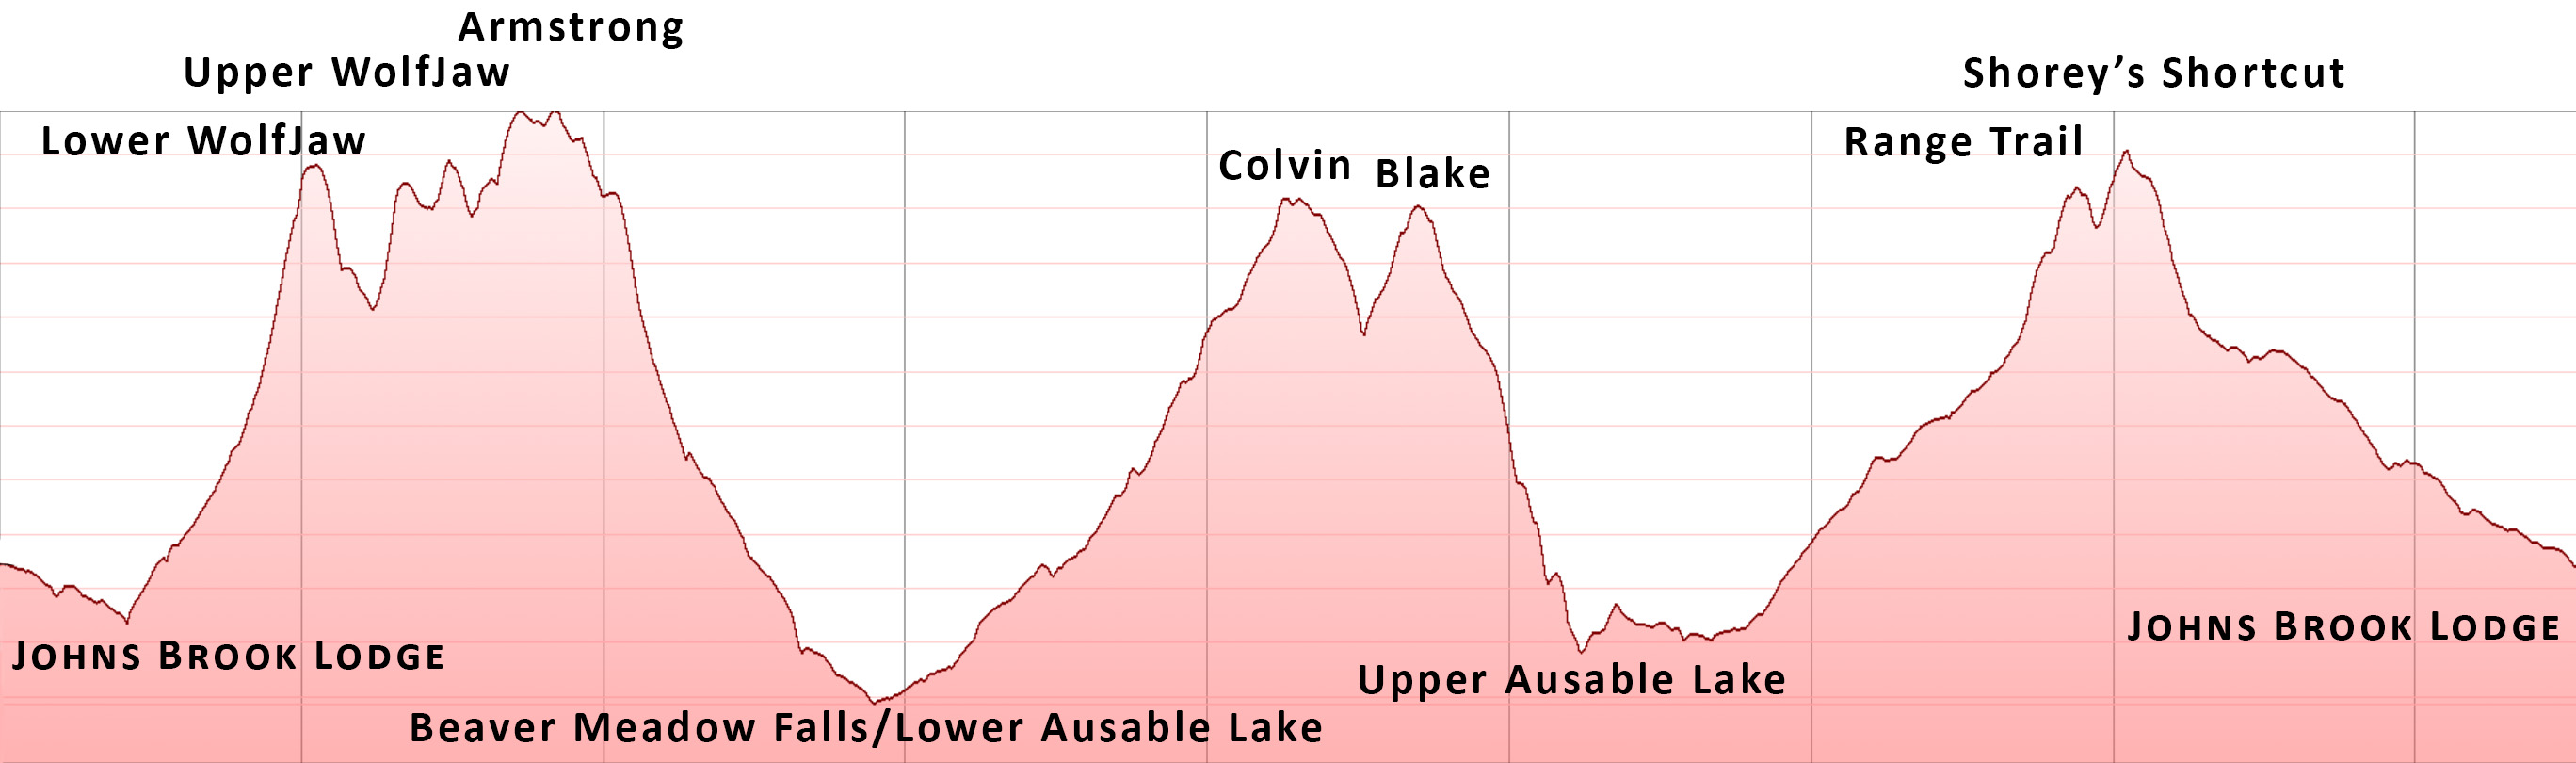 Elevation profile: JBL to Lower WolfJaw, Upper WolfJaw, Armstrong, Colvin, Blake, and Shorey's Shortcut